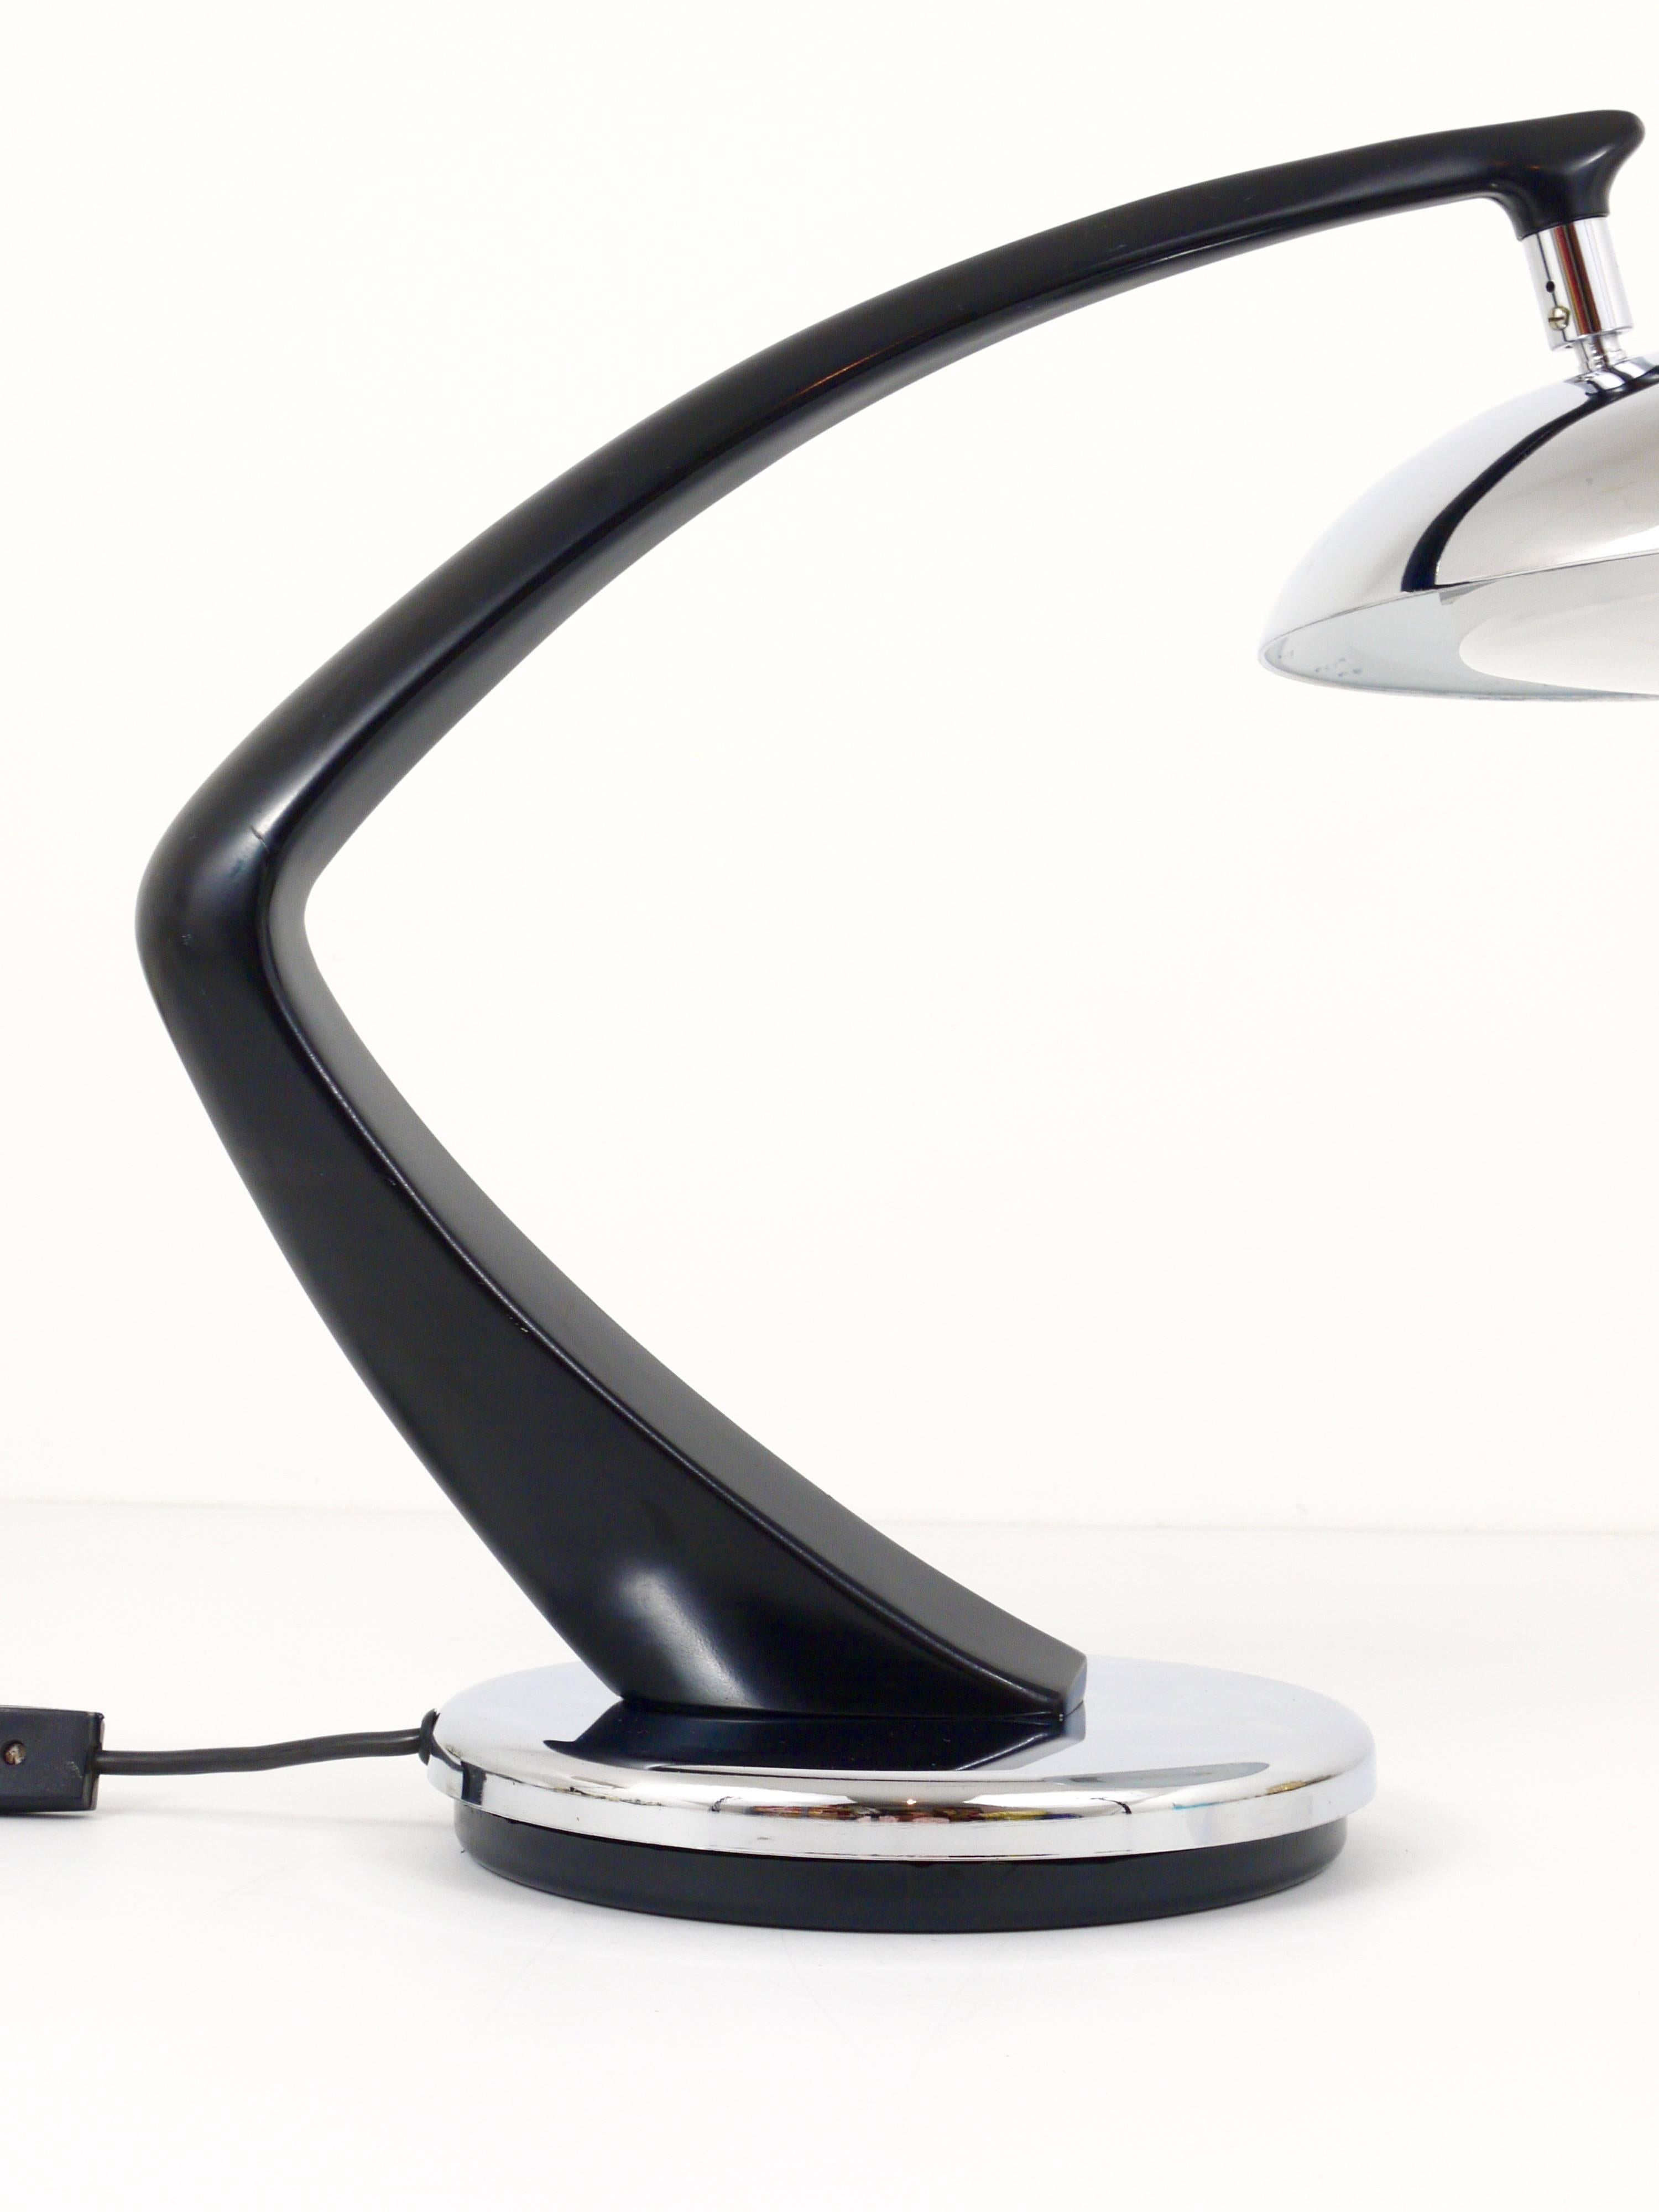 A beautiful black and chrome boomerang table lamp, executed in the 1960s by Fase, Madrid. Have a swivel base and an adjustable lampshade with two sockets. In very good condition.